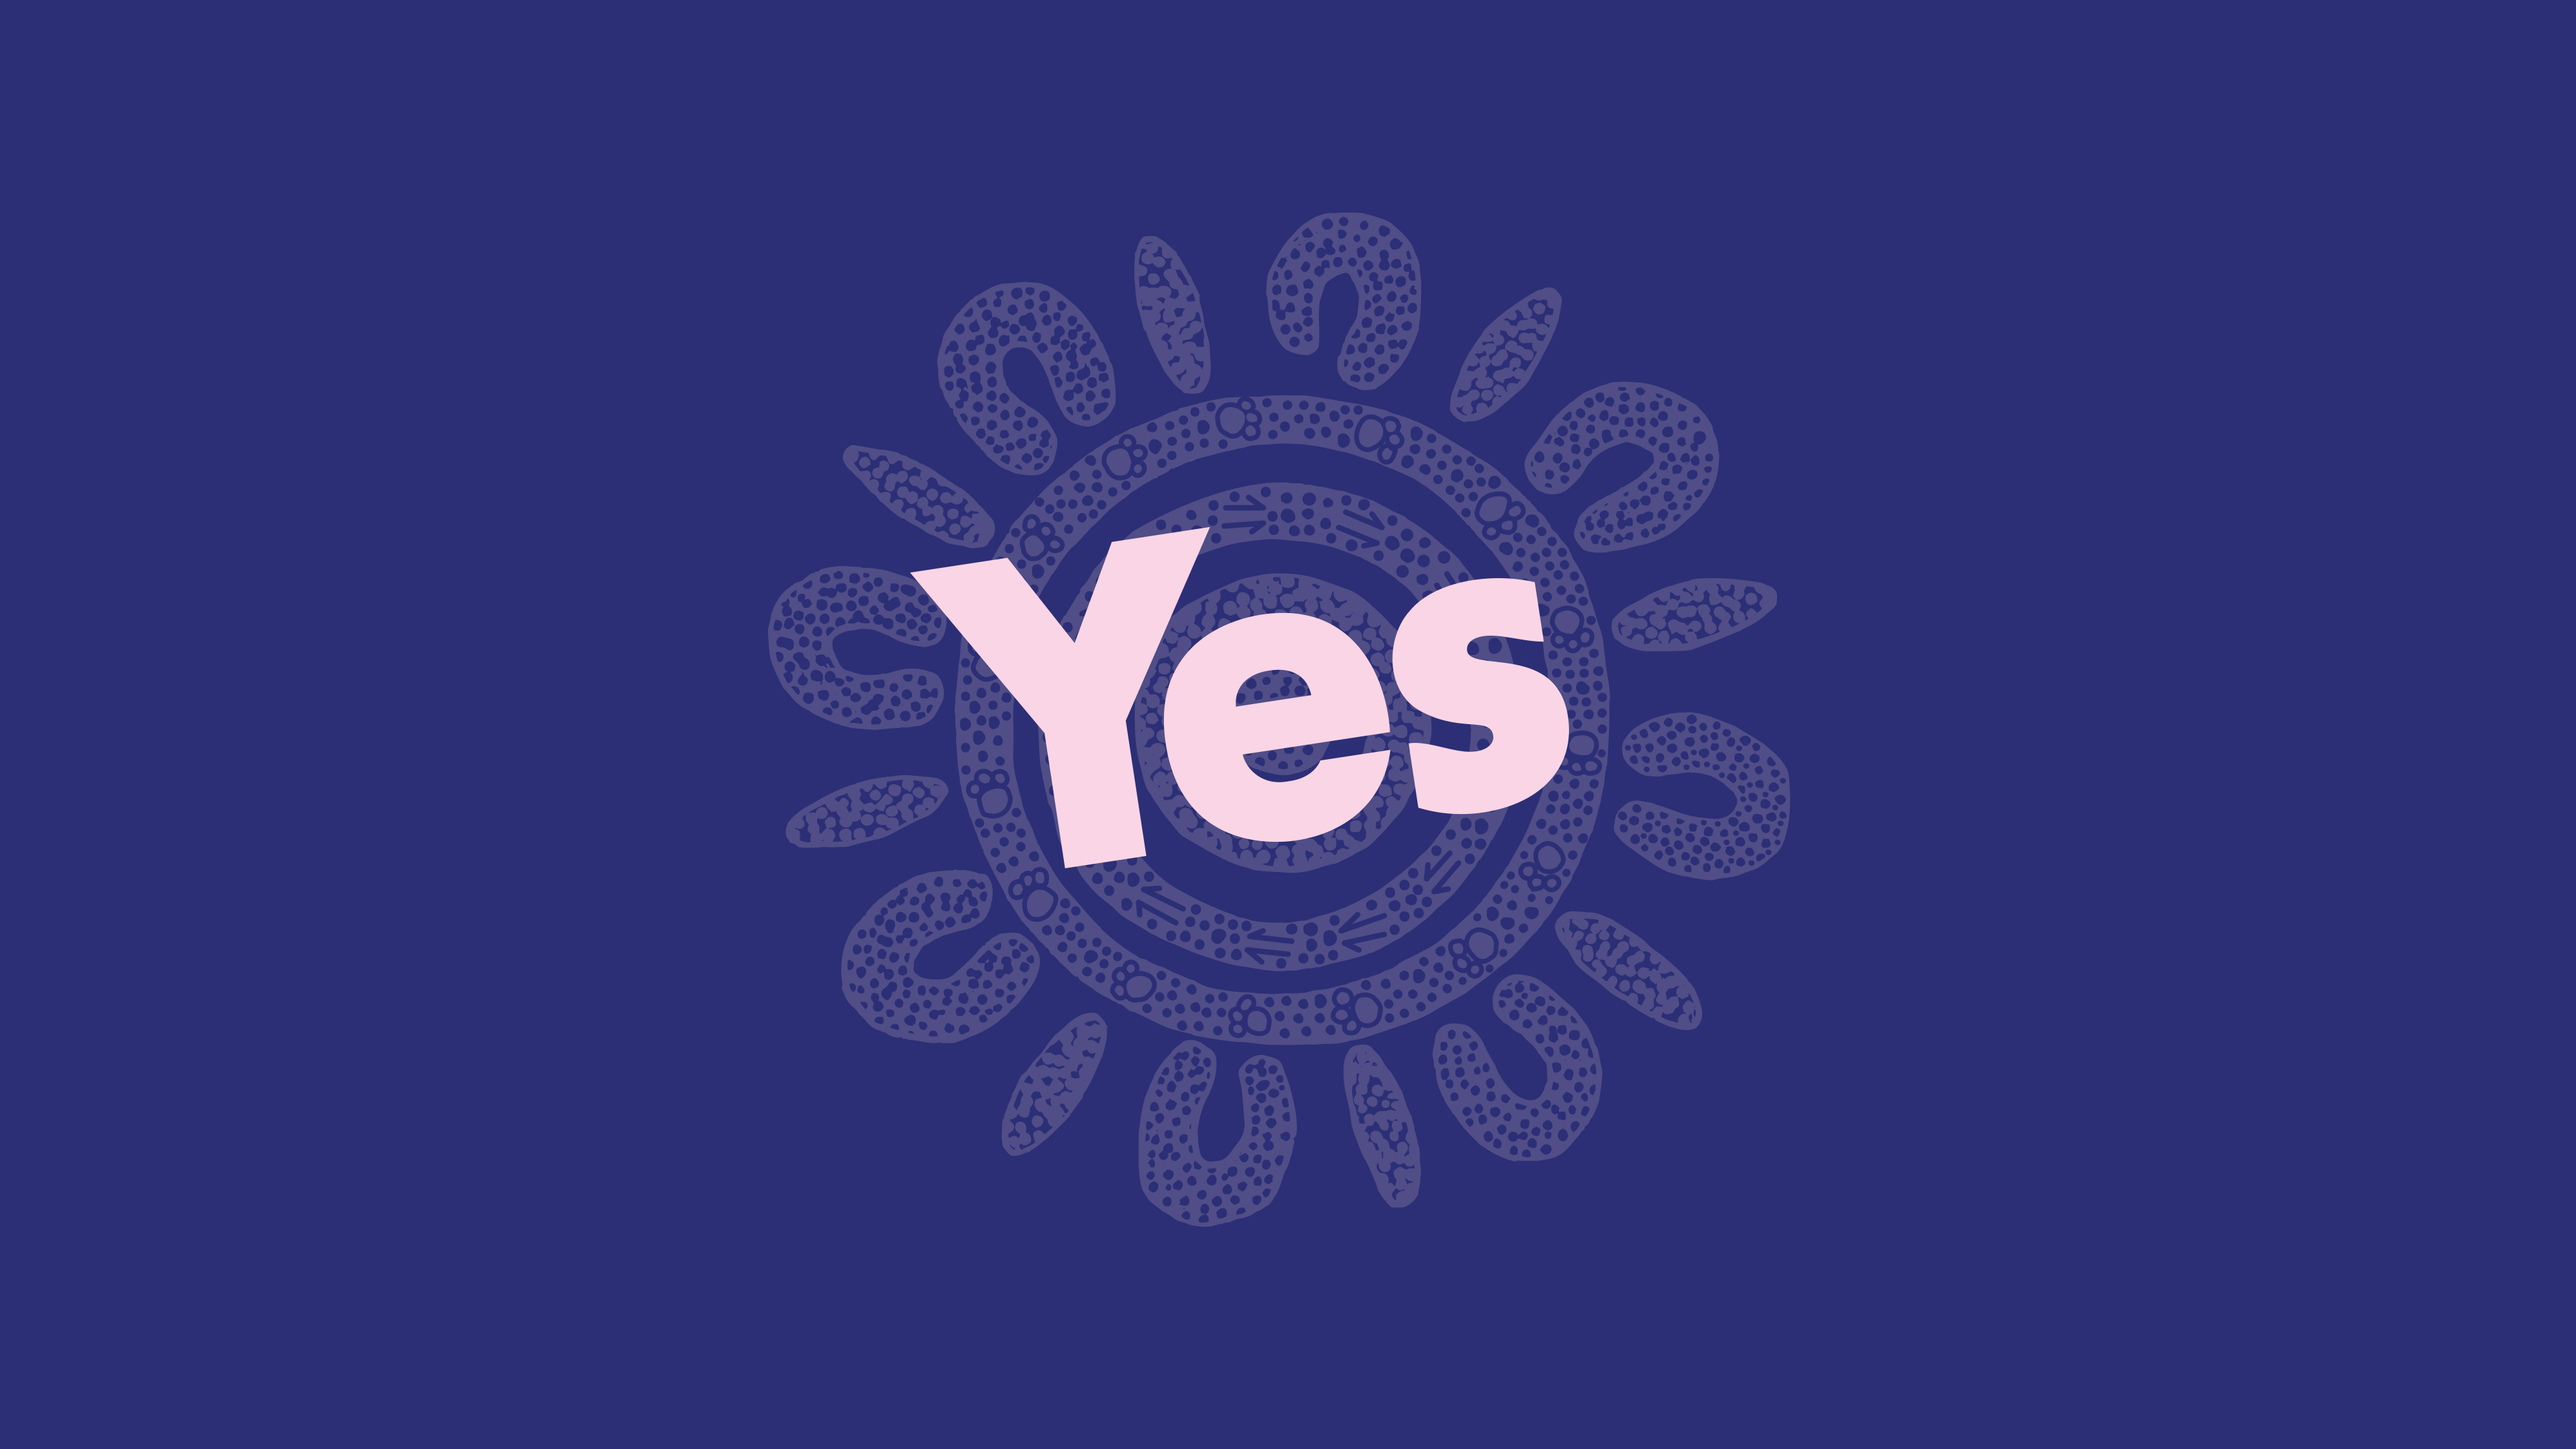 Pink 'Yes' icon on blue background supporting the Voice to Parliament.